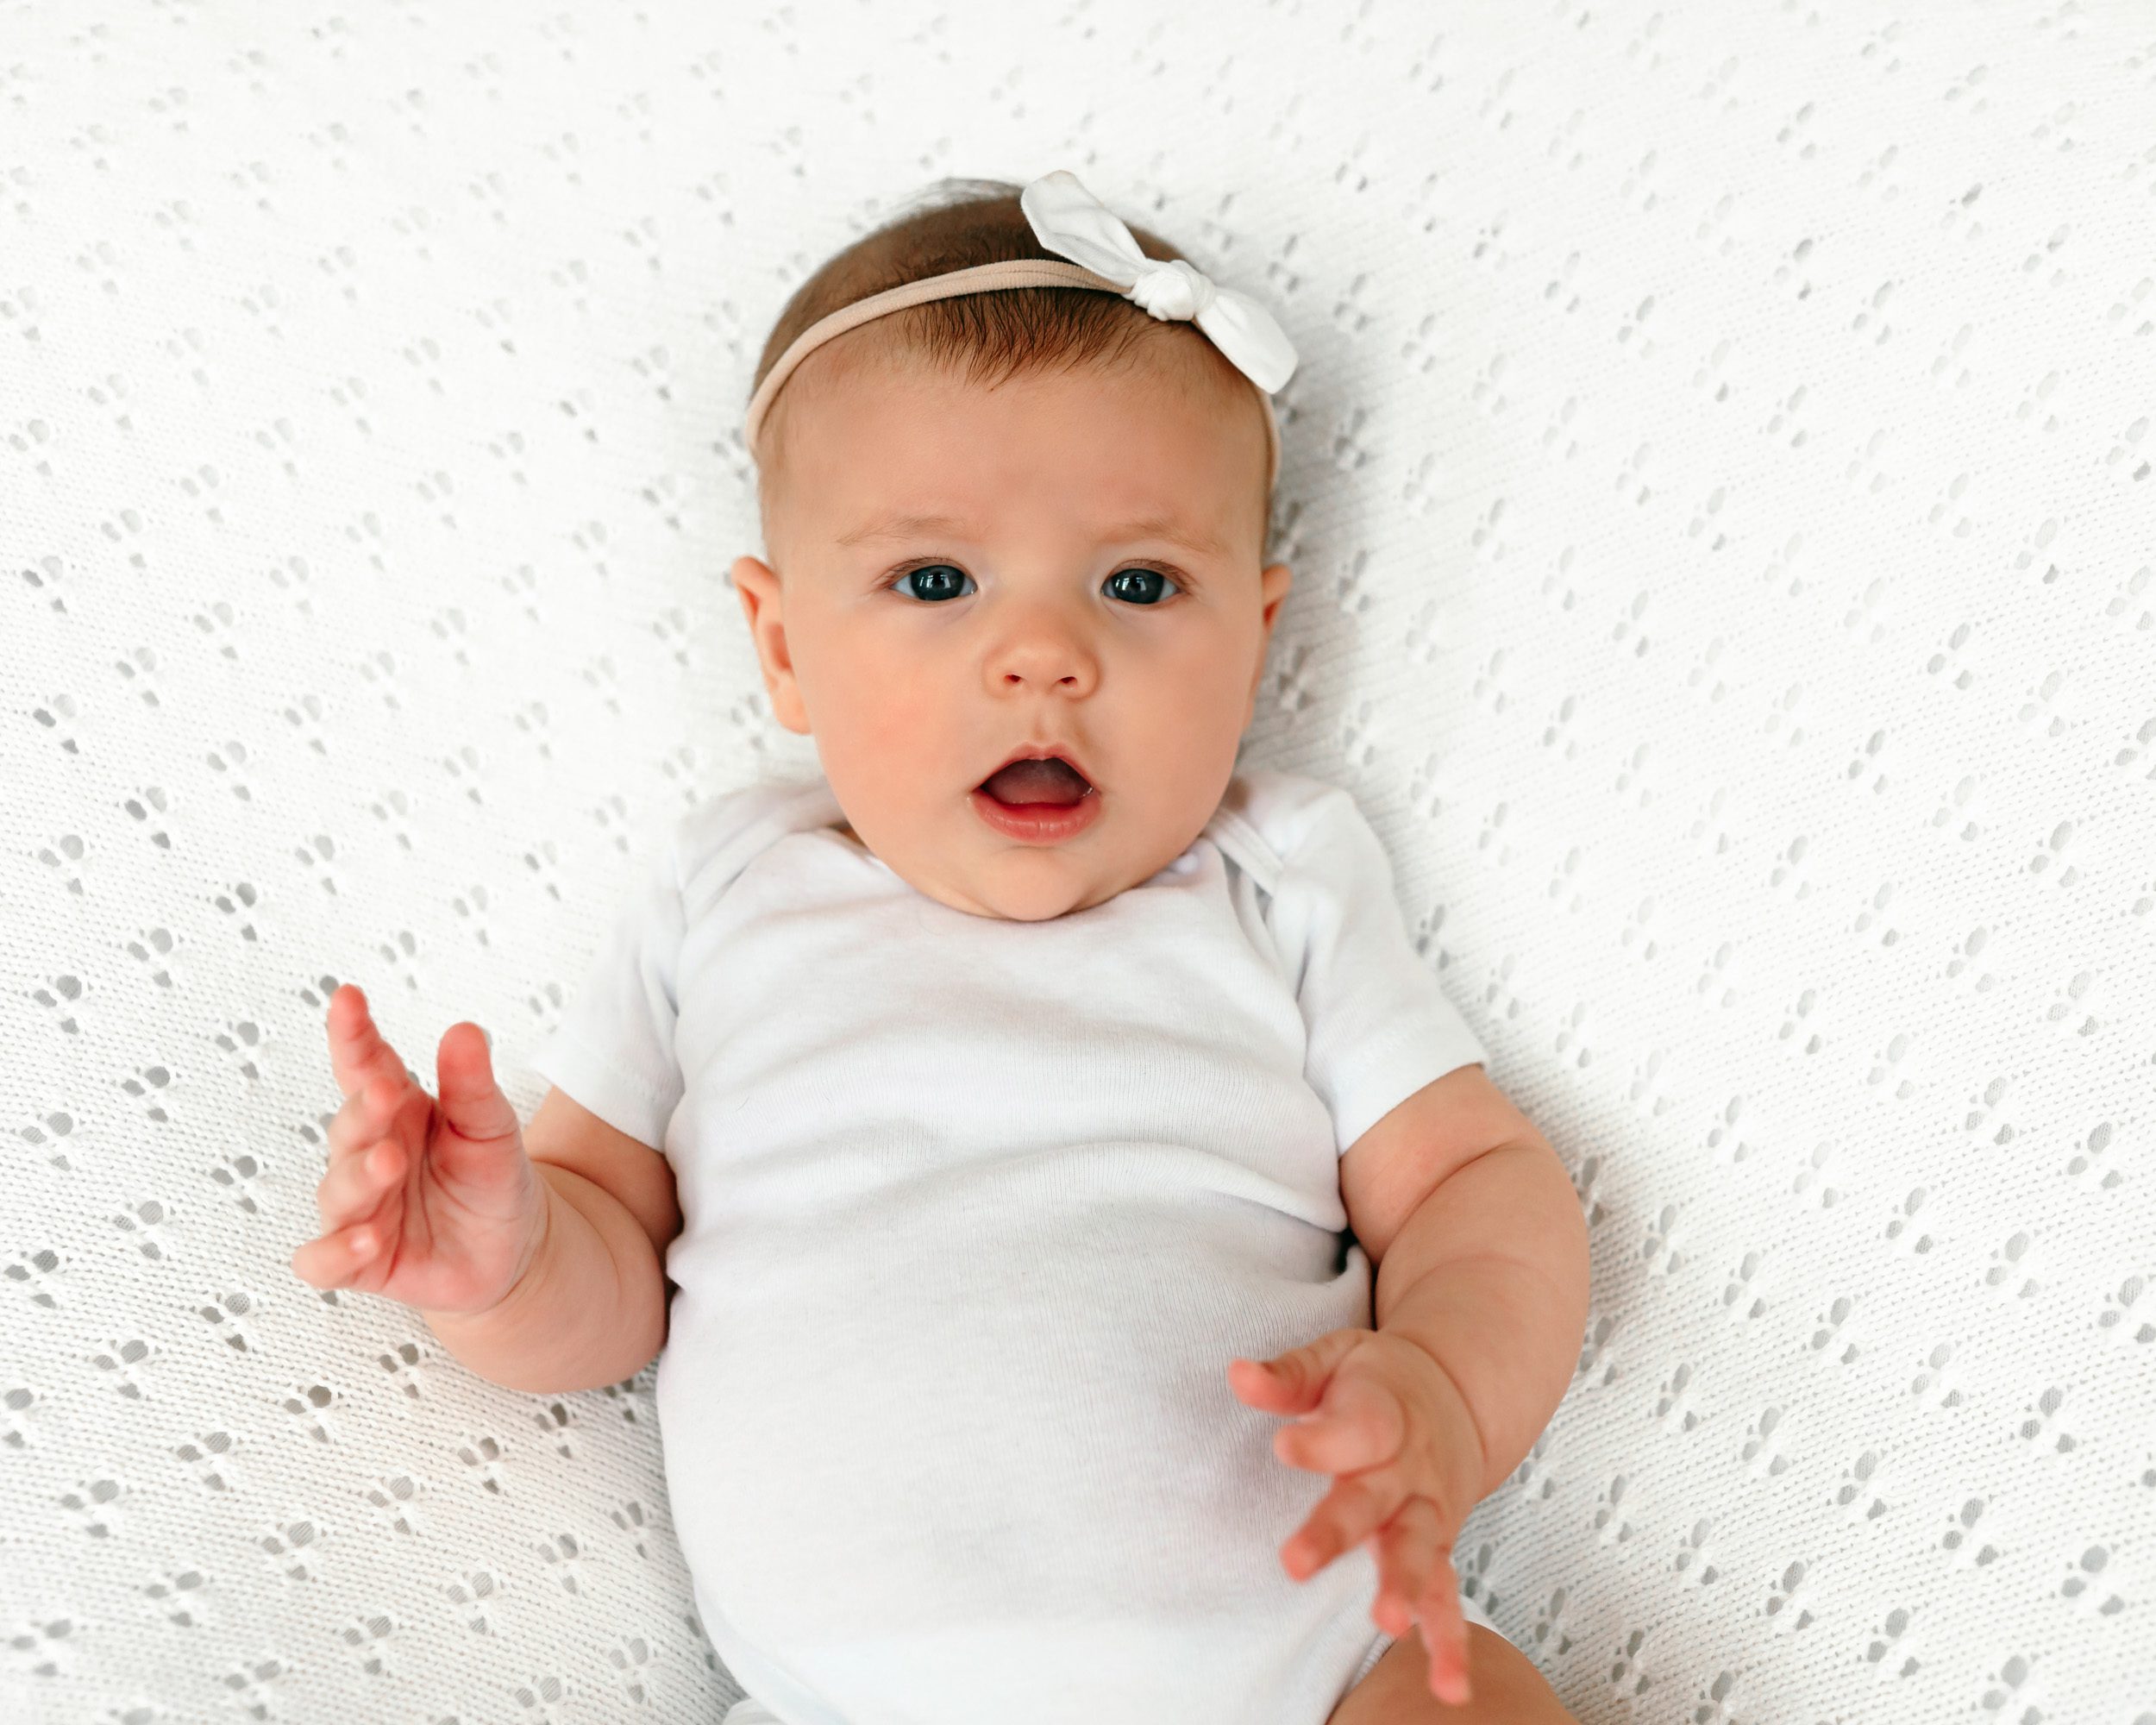 A baby girl in a white onesie on a white textured backdrop looking at the camera with a surprised expression during a home newborn photo session